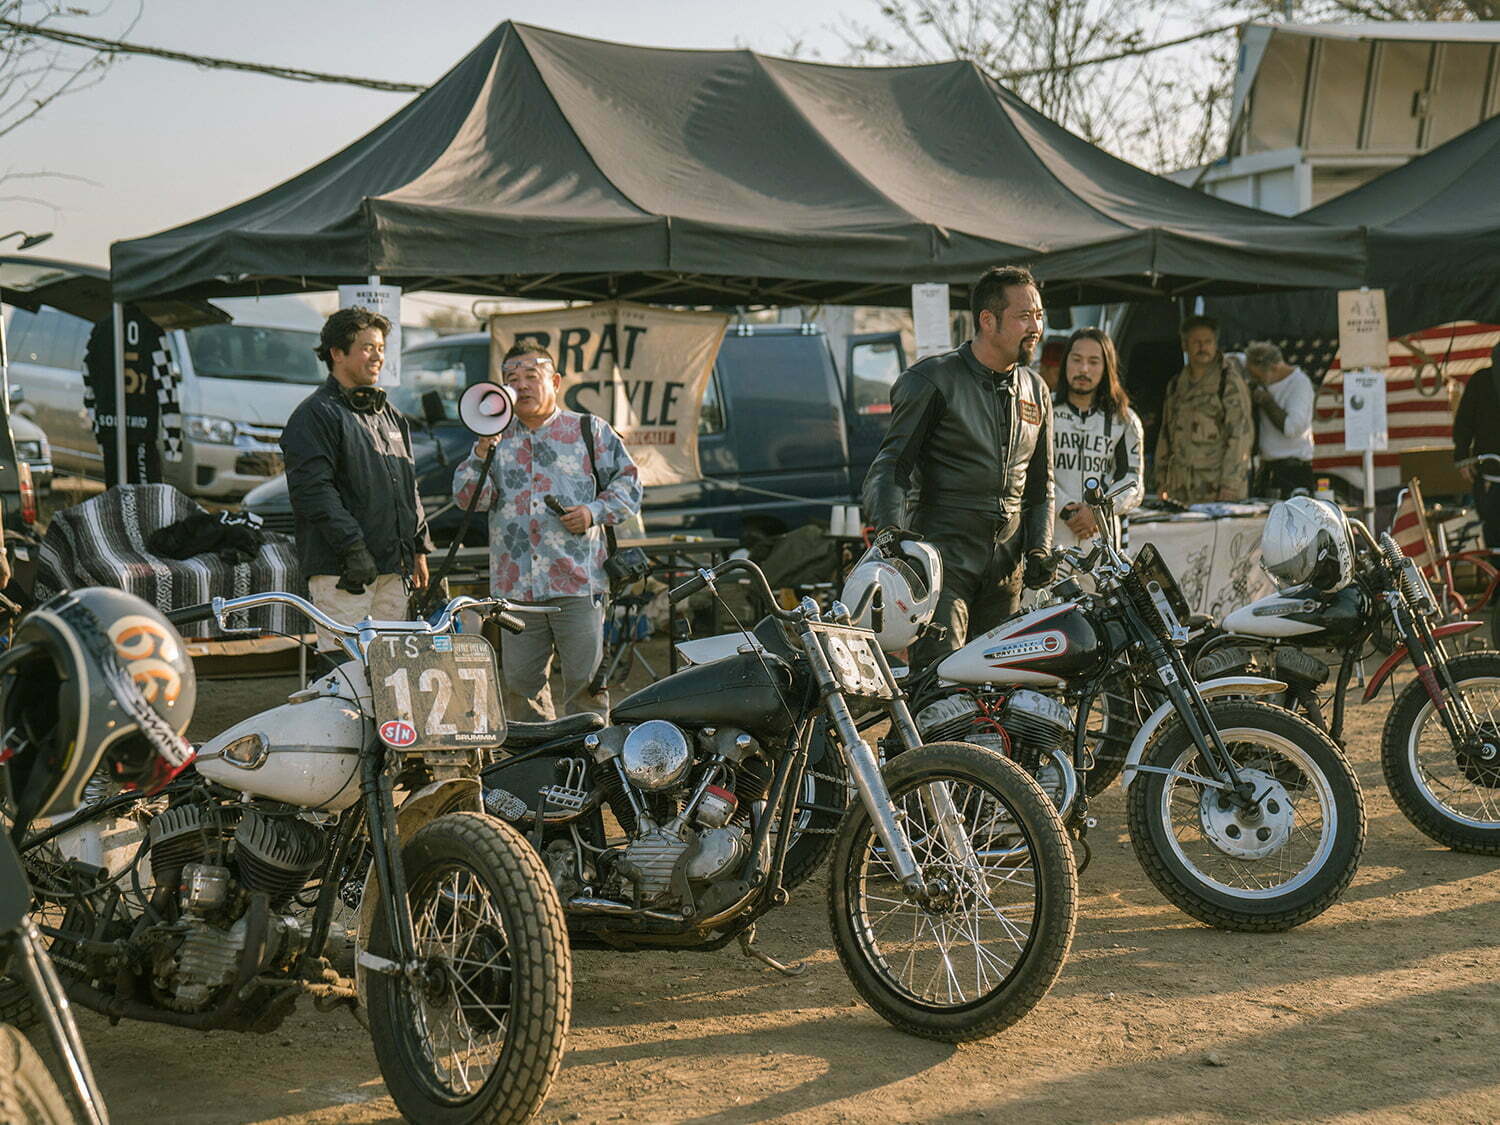 motorcycles lined up in front of Bratstyle booth